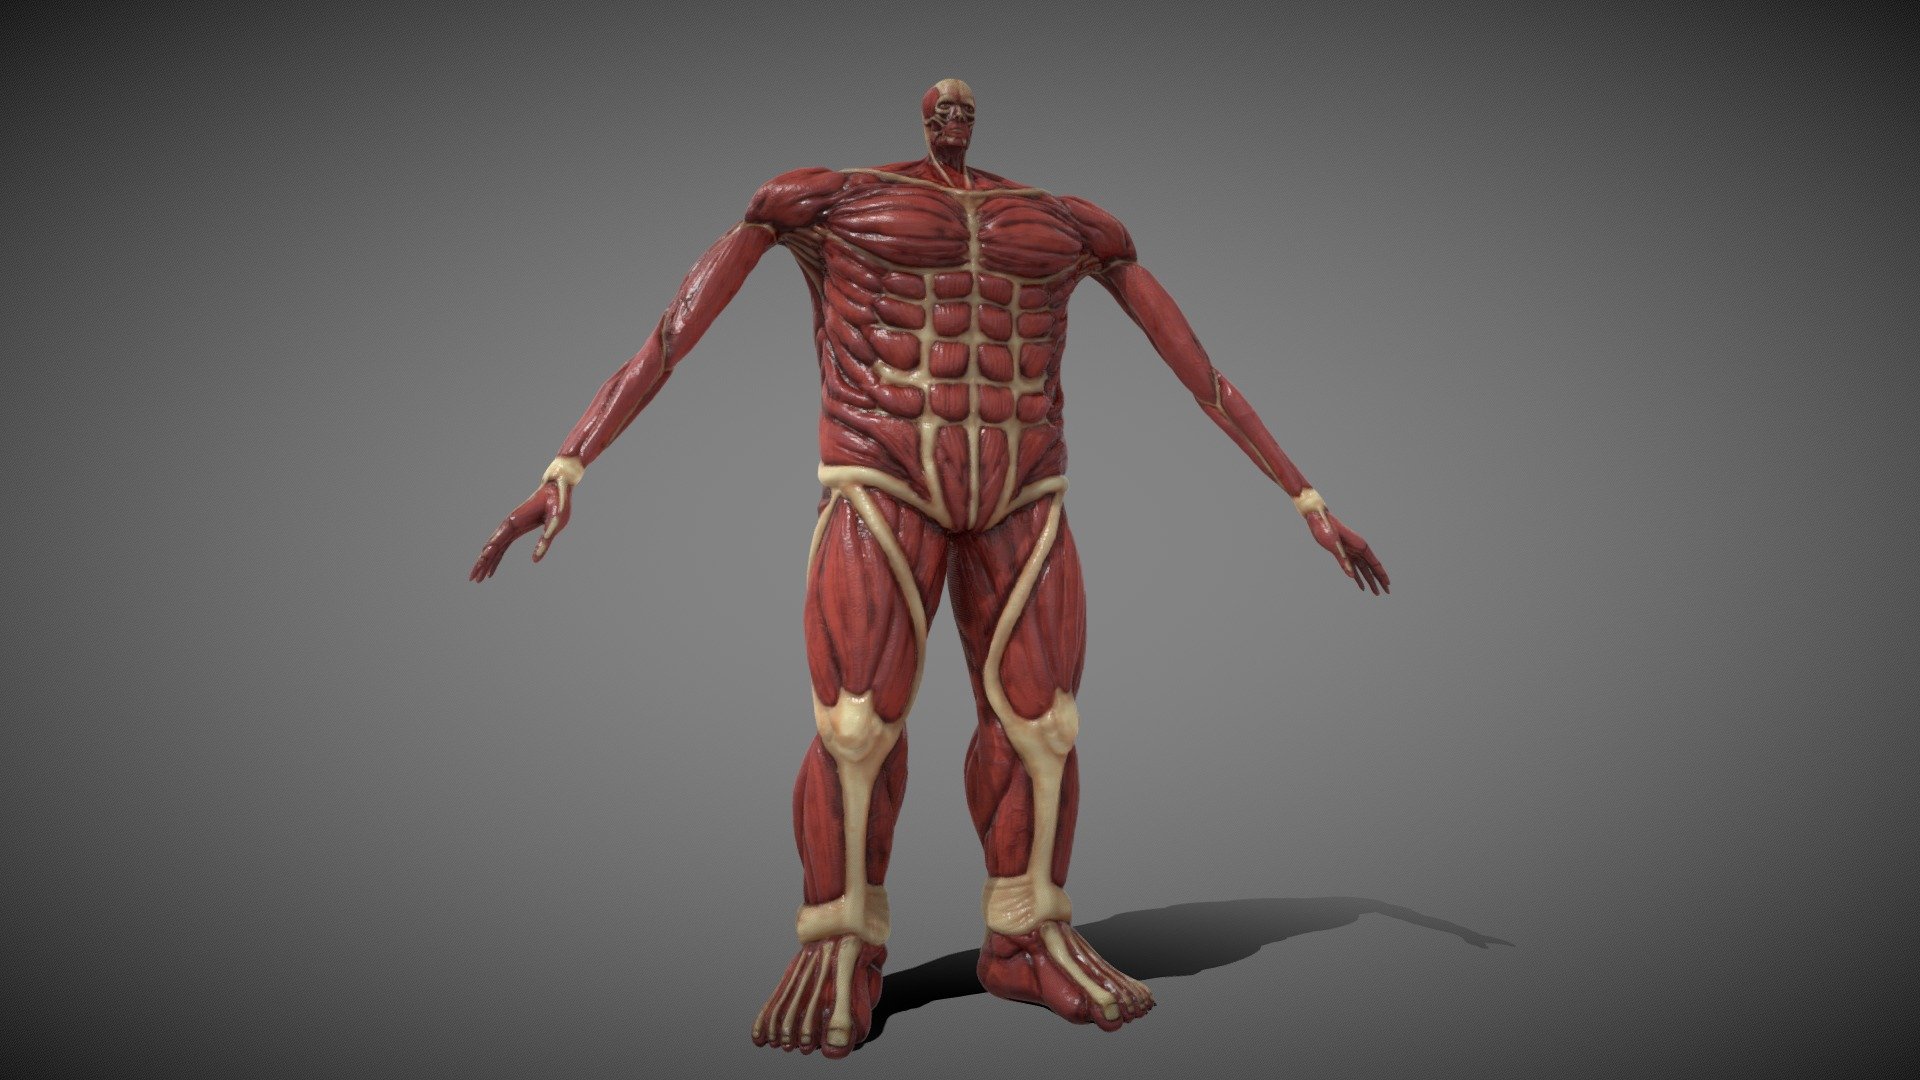 Here is this titan I made in blender in a &lsquo;reallistic' version with a more acurated head. Its not rigged but is compatible with mixamo autorig. Hope you like it.

-2K texture

-1 material

-Mixamo compatible

-2 UDIMs

-No pluggins

-OBJ and FBX

-Maps included: basecolor, height, normal, roughness, AO 3d model